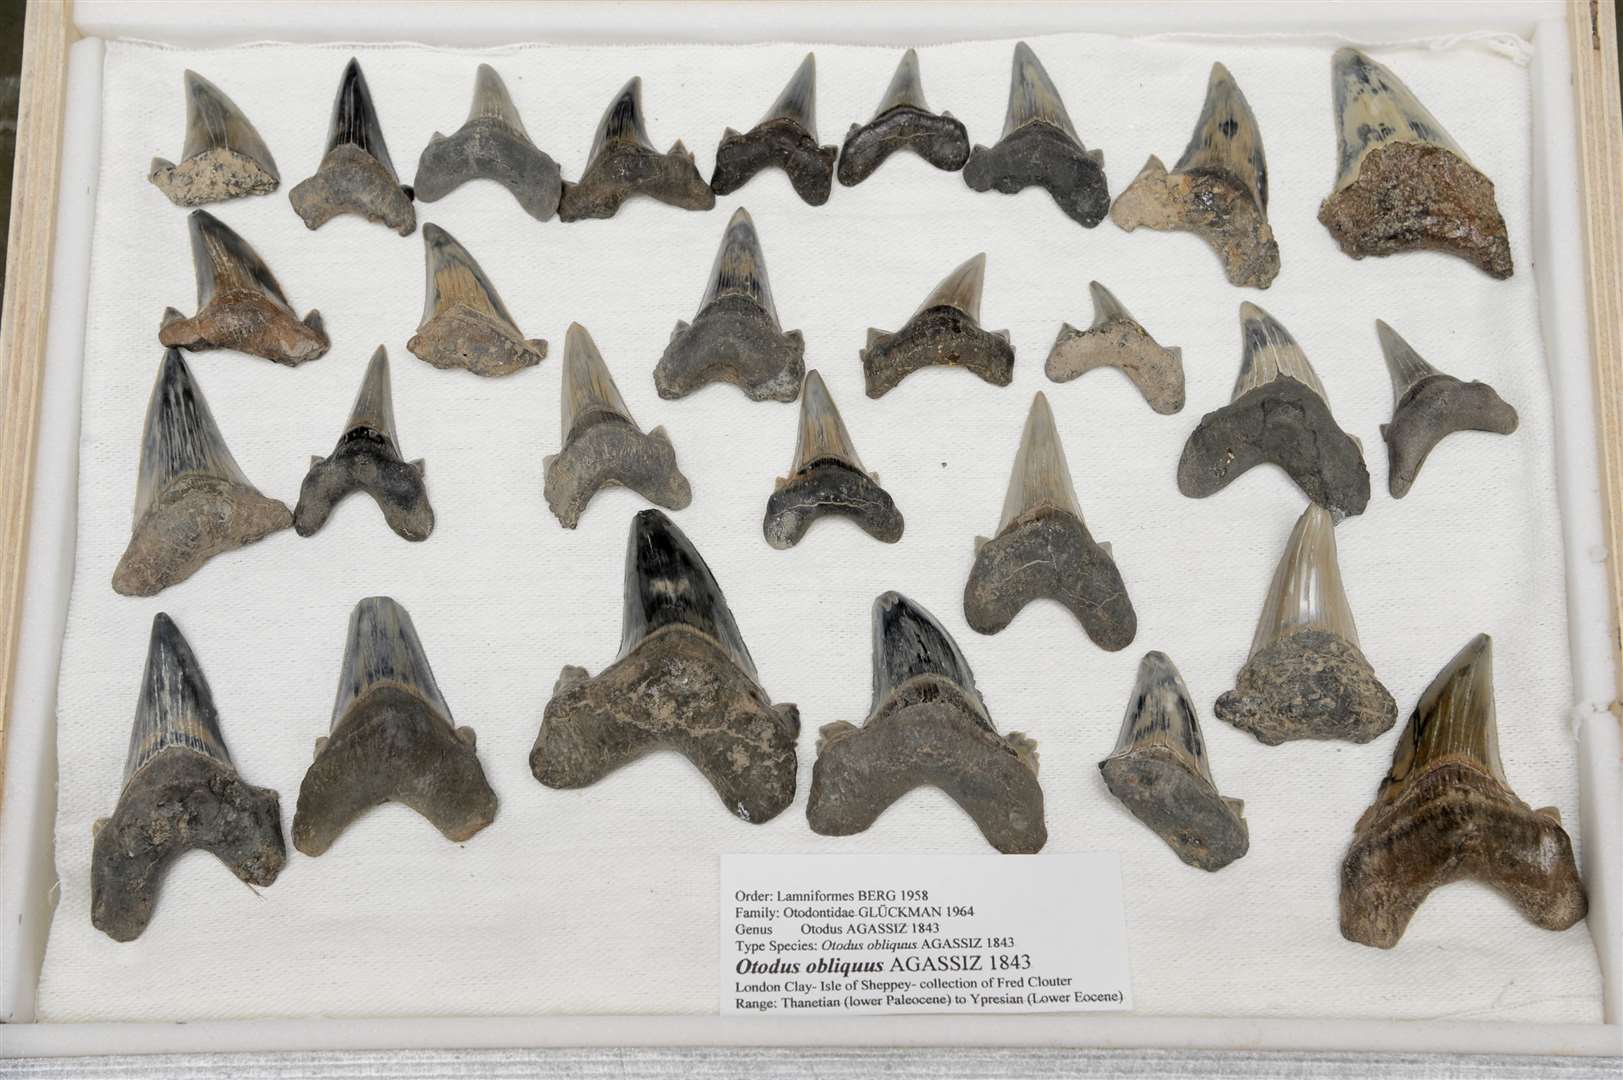 The shark teeth collection of Fred Clouter, of Minster, Sheppey